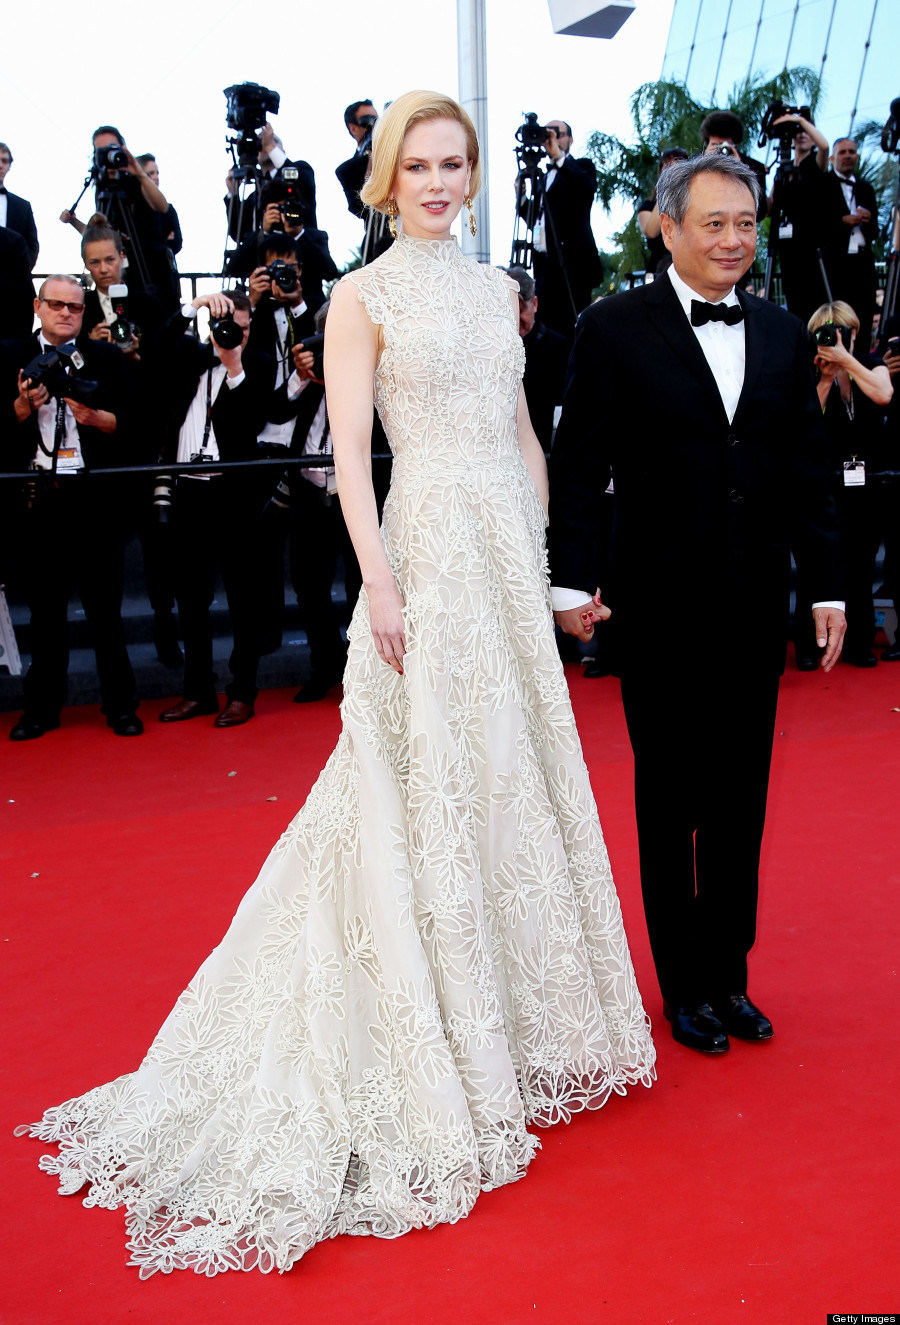 ... Cannes 2013 Dress Was Supposed To Be Anne Hathaway's Oscar 2013 Dress